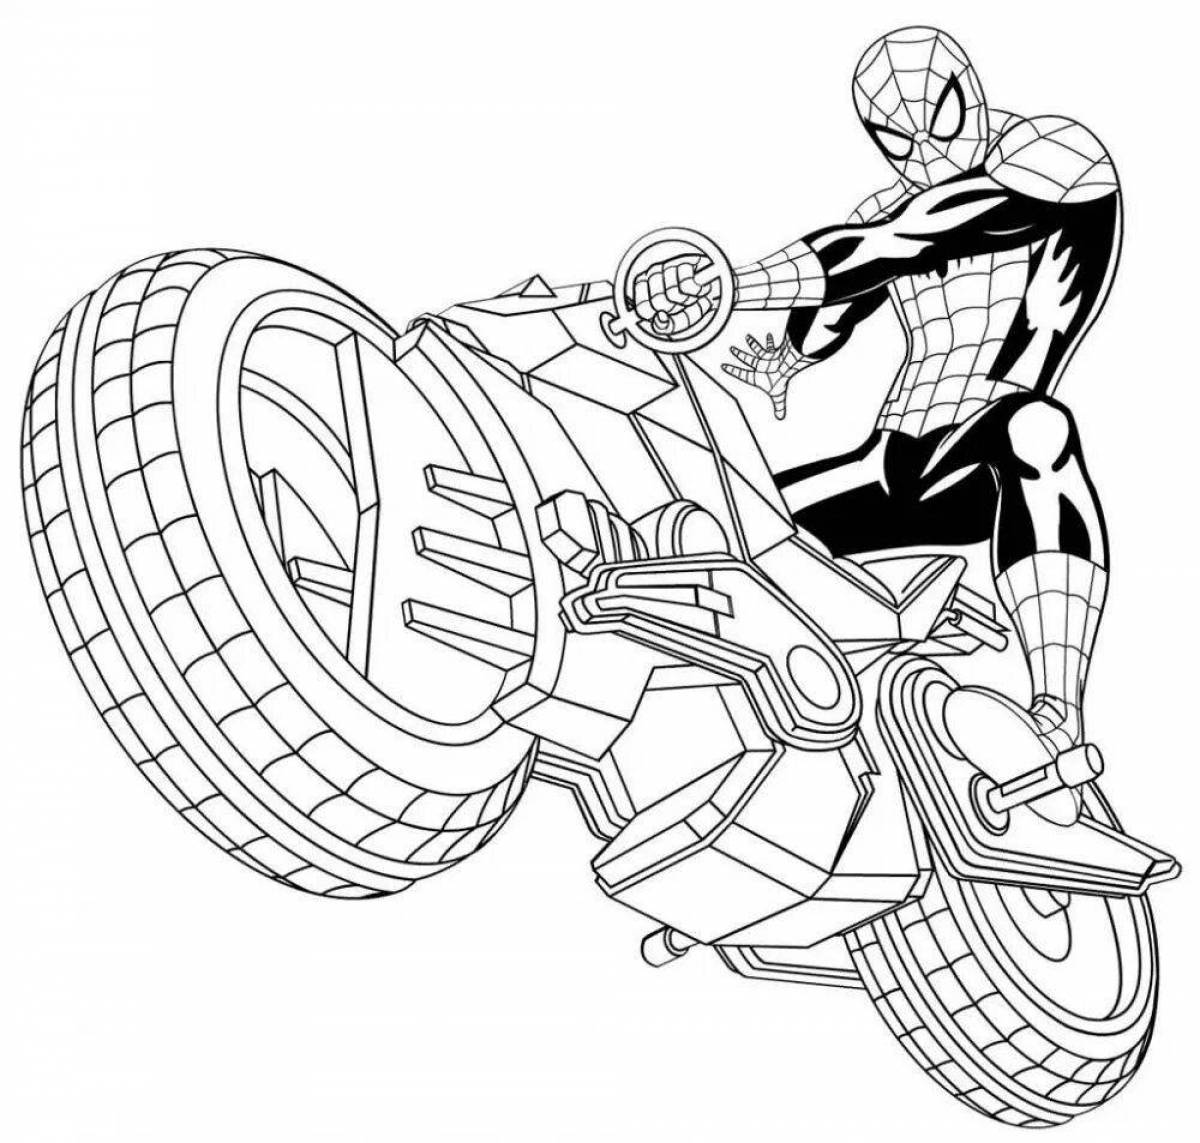 Punch Spiderman coloring page